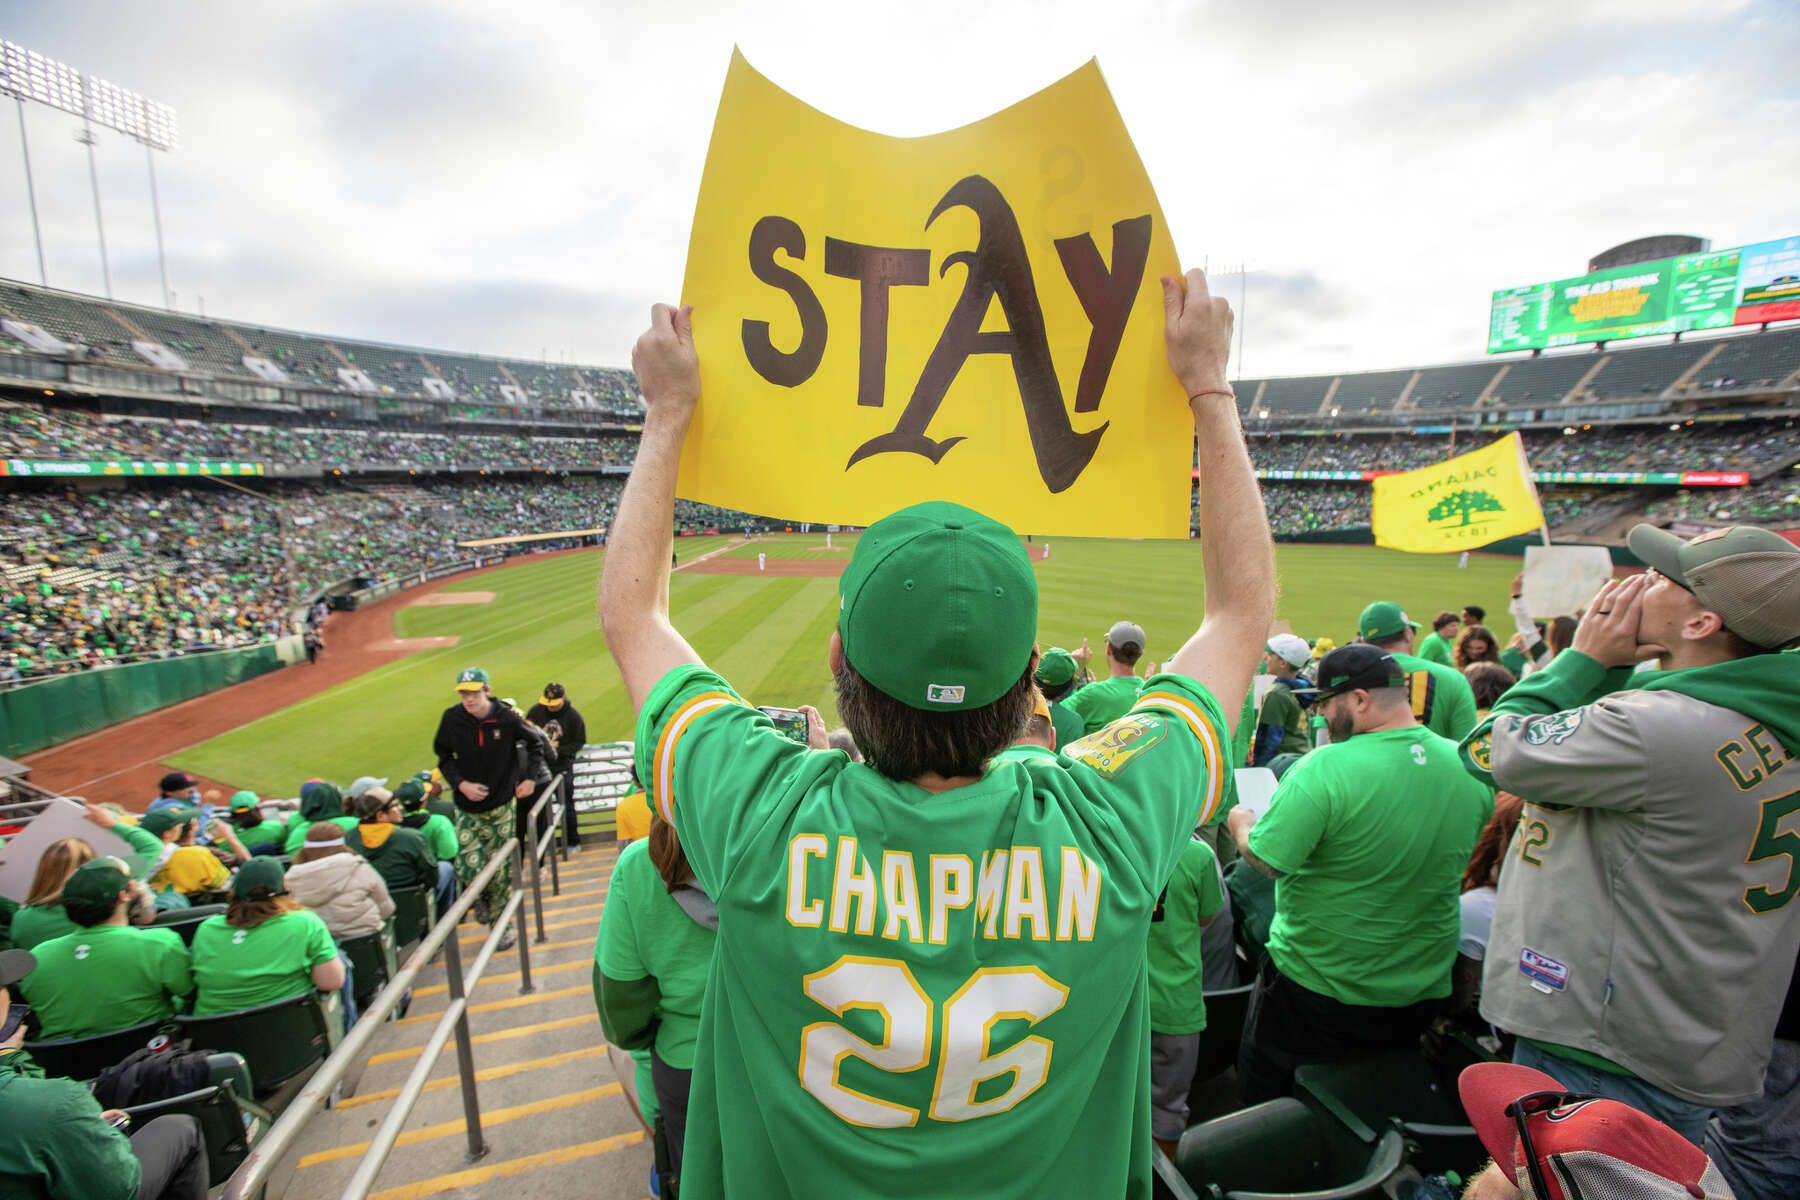 Oakland A's Fans Want Team to Sell Rather Than Move to Las Vegas